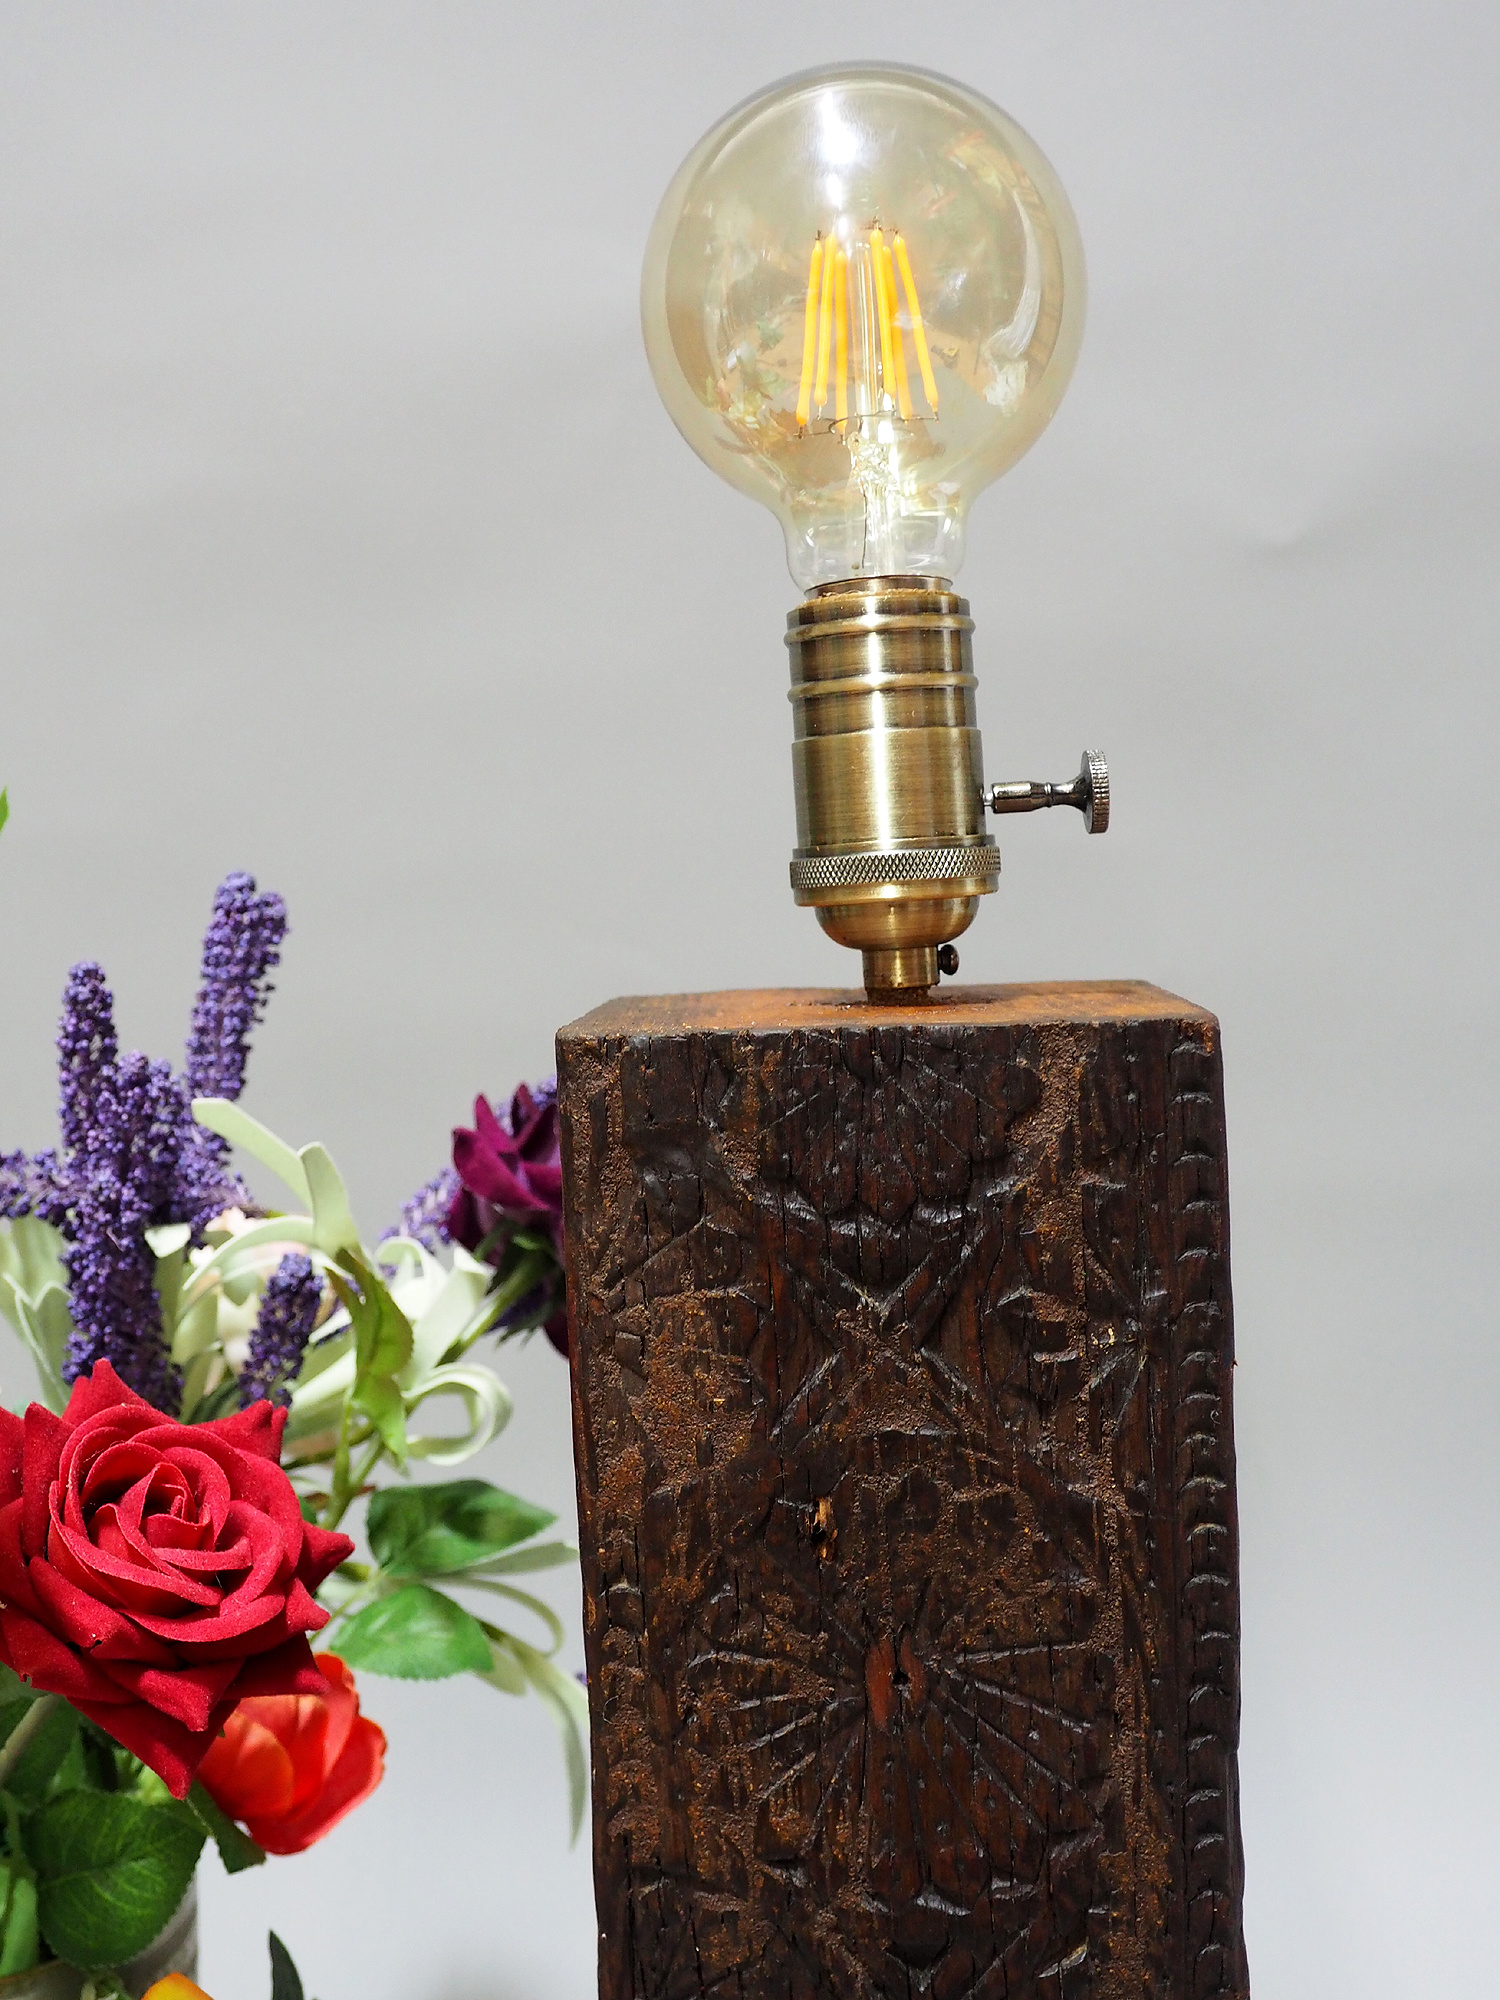 antique wooden table lamp lamp base from Nuristan Afghanistan Swat velly pakistan with brass lampholder. No:NU2